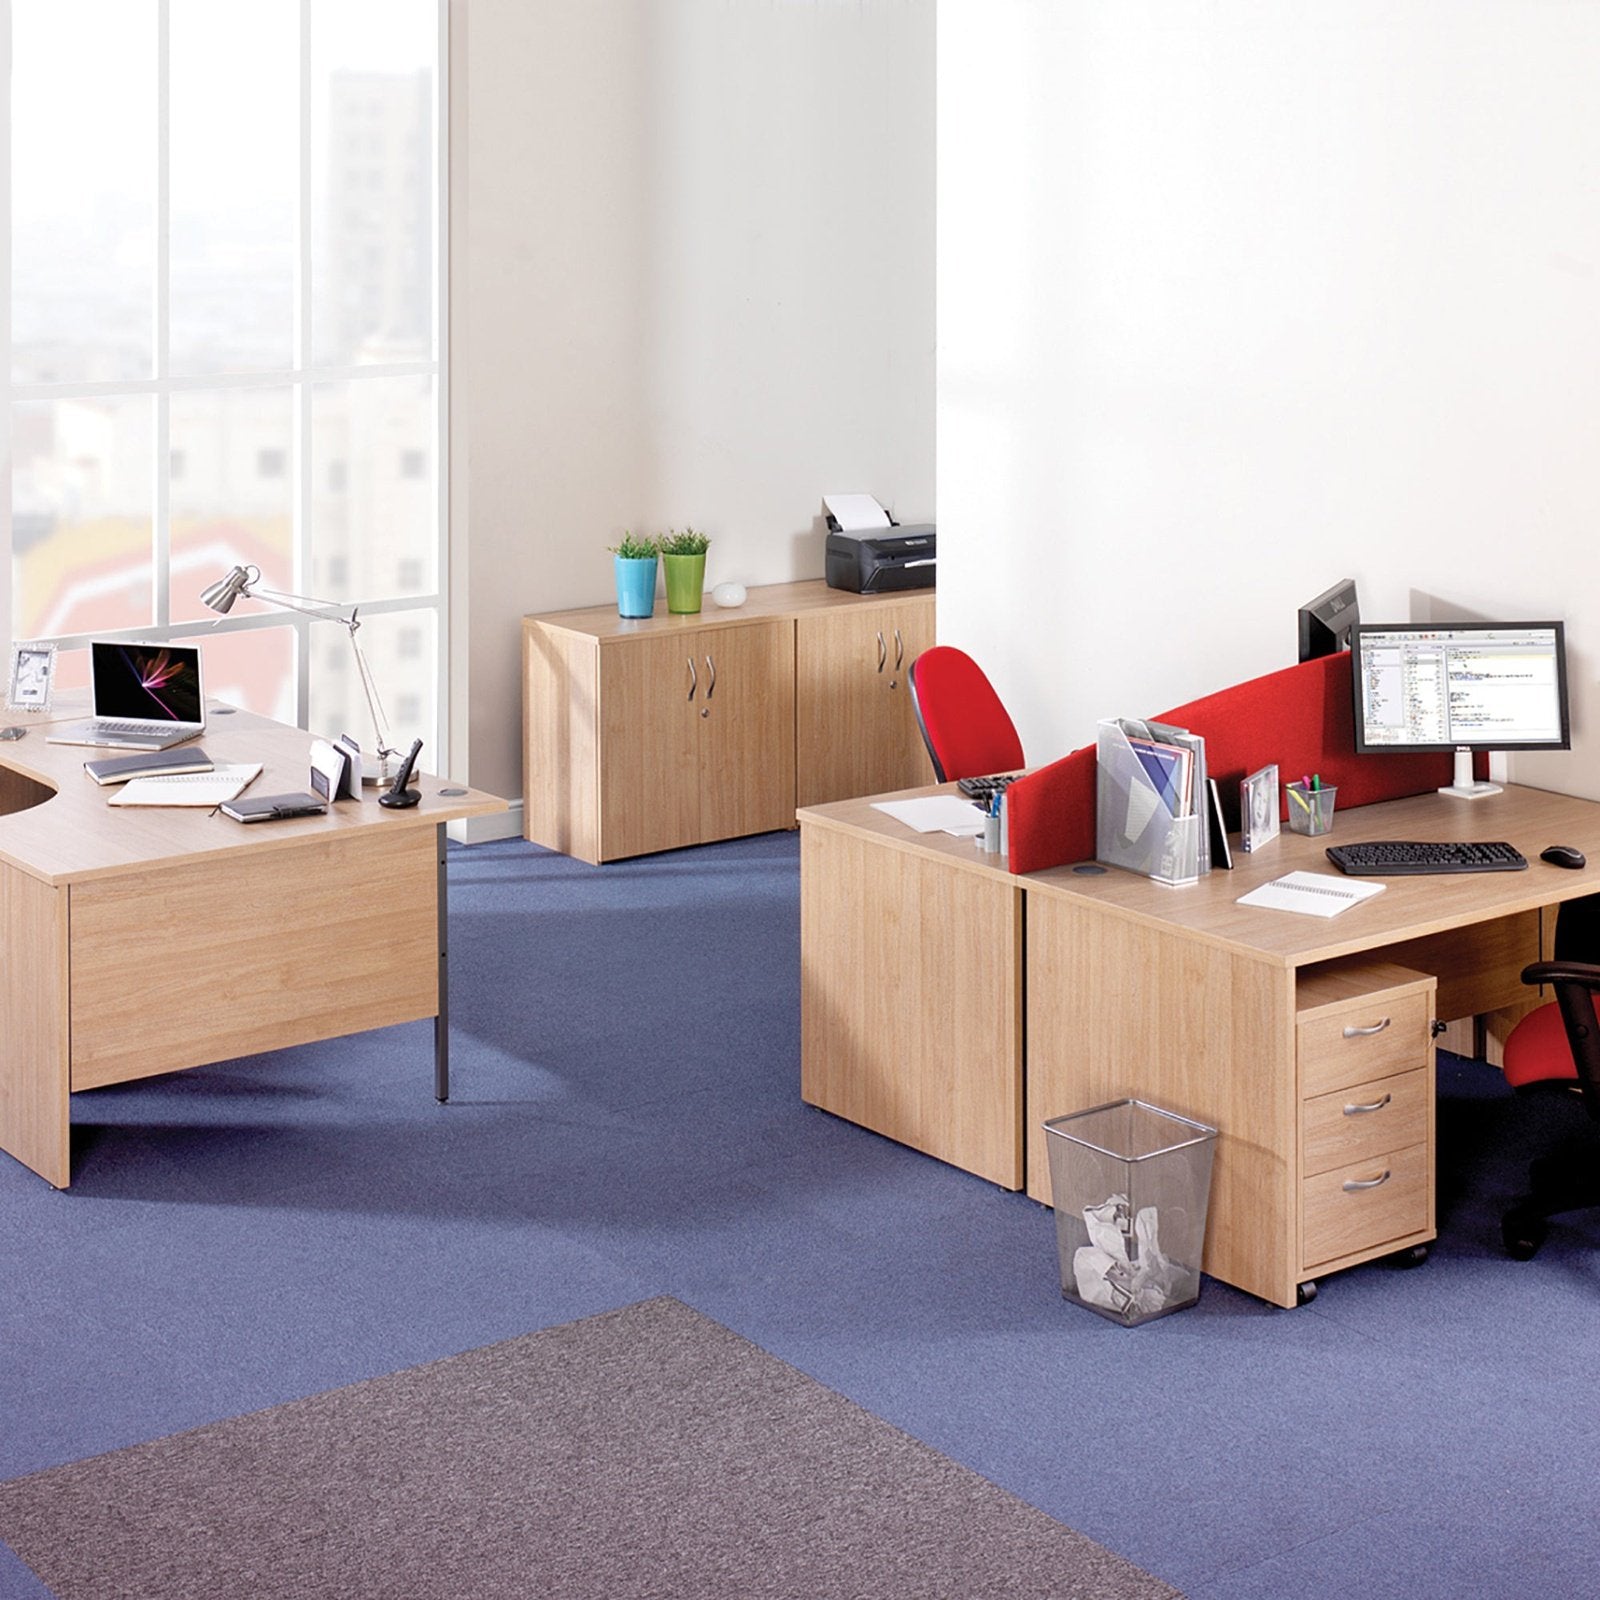 Maestro 25 panel leg straight desk 800 deep with 2 and 3 drawer pedestals - Office Products Online